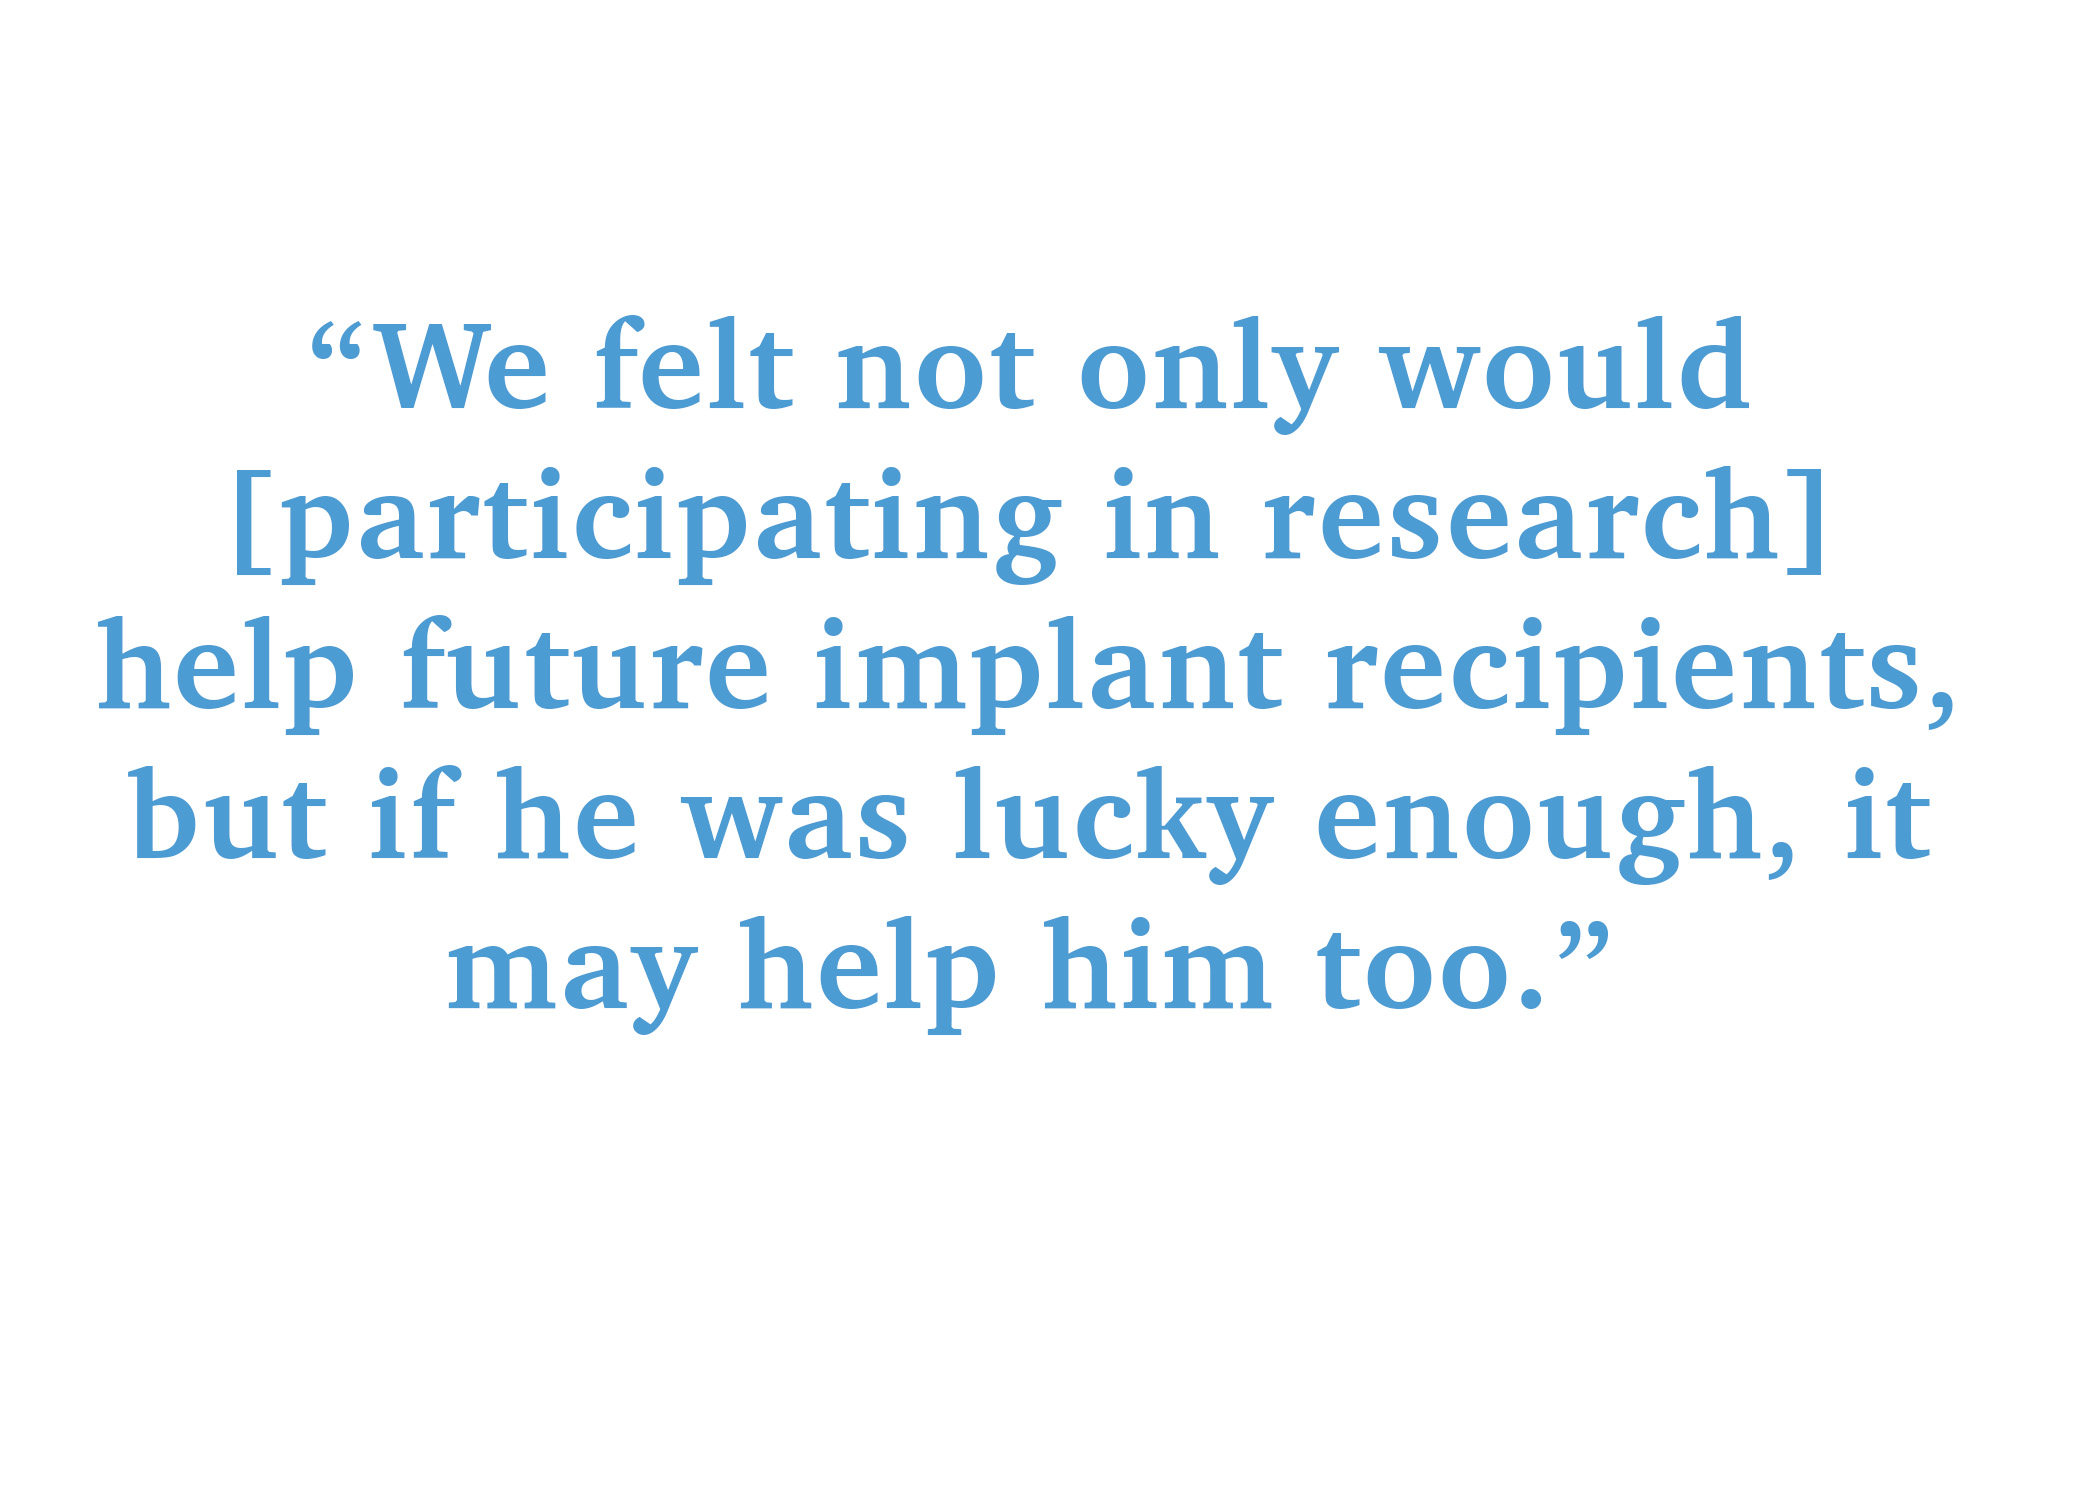 "We felt not only would participating in research help future implant recipients, but if he was lucky enough, it may help him too."